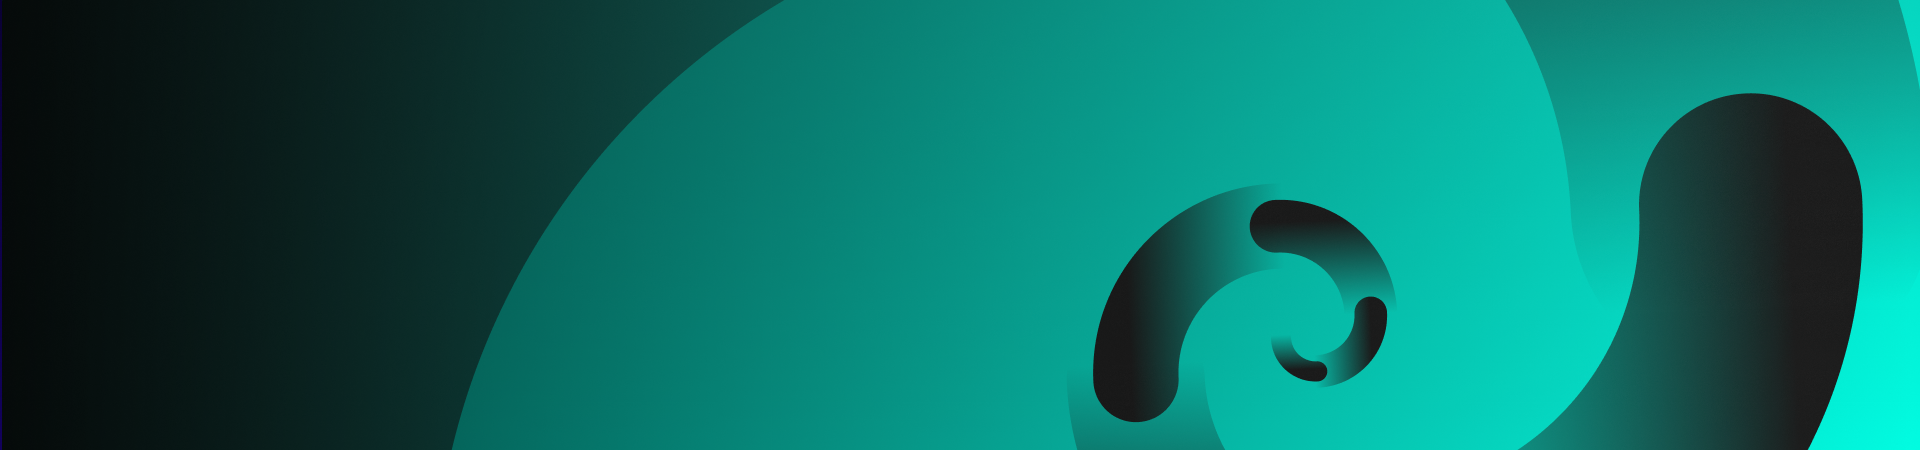 Black spiral on a turquoise background